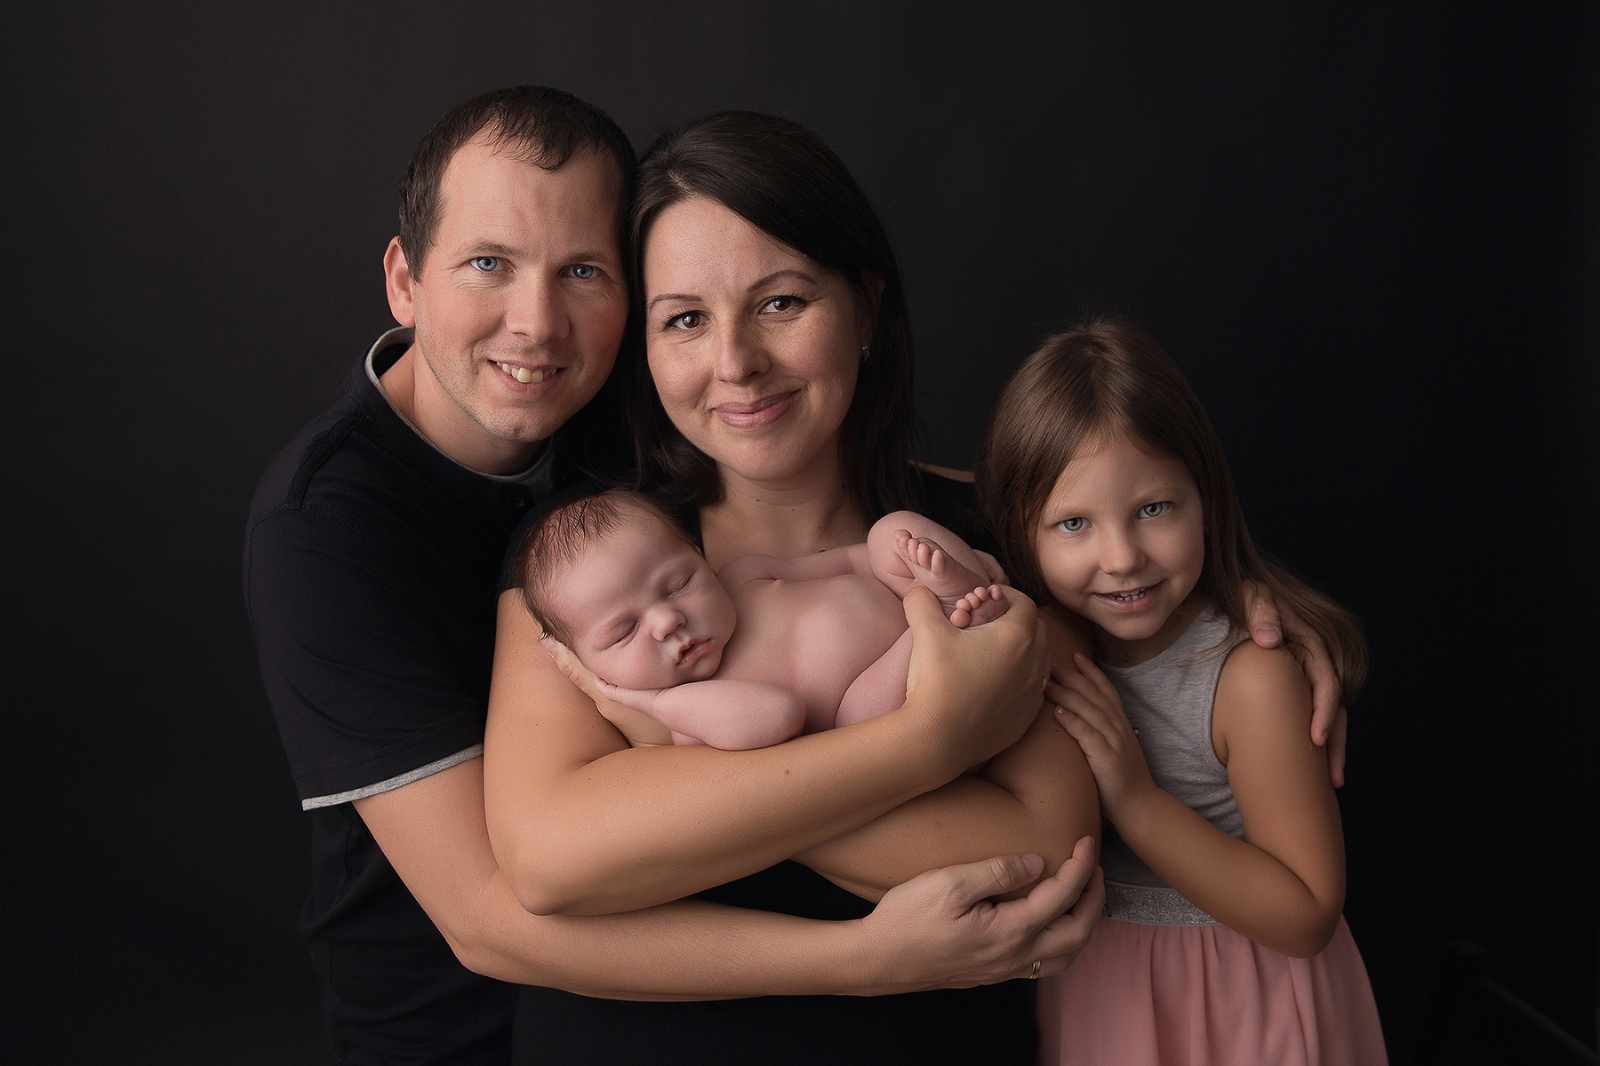 Studio family portrait with dark background of a happy family, mother and father and young daughter, smiling together with their sleeping six-day-old newborn baby in the mother's arms. Image by Helga Himer Photography, Sudbury, Ontario.